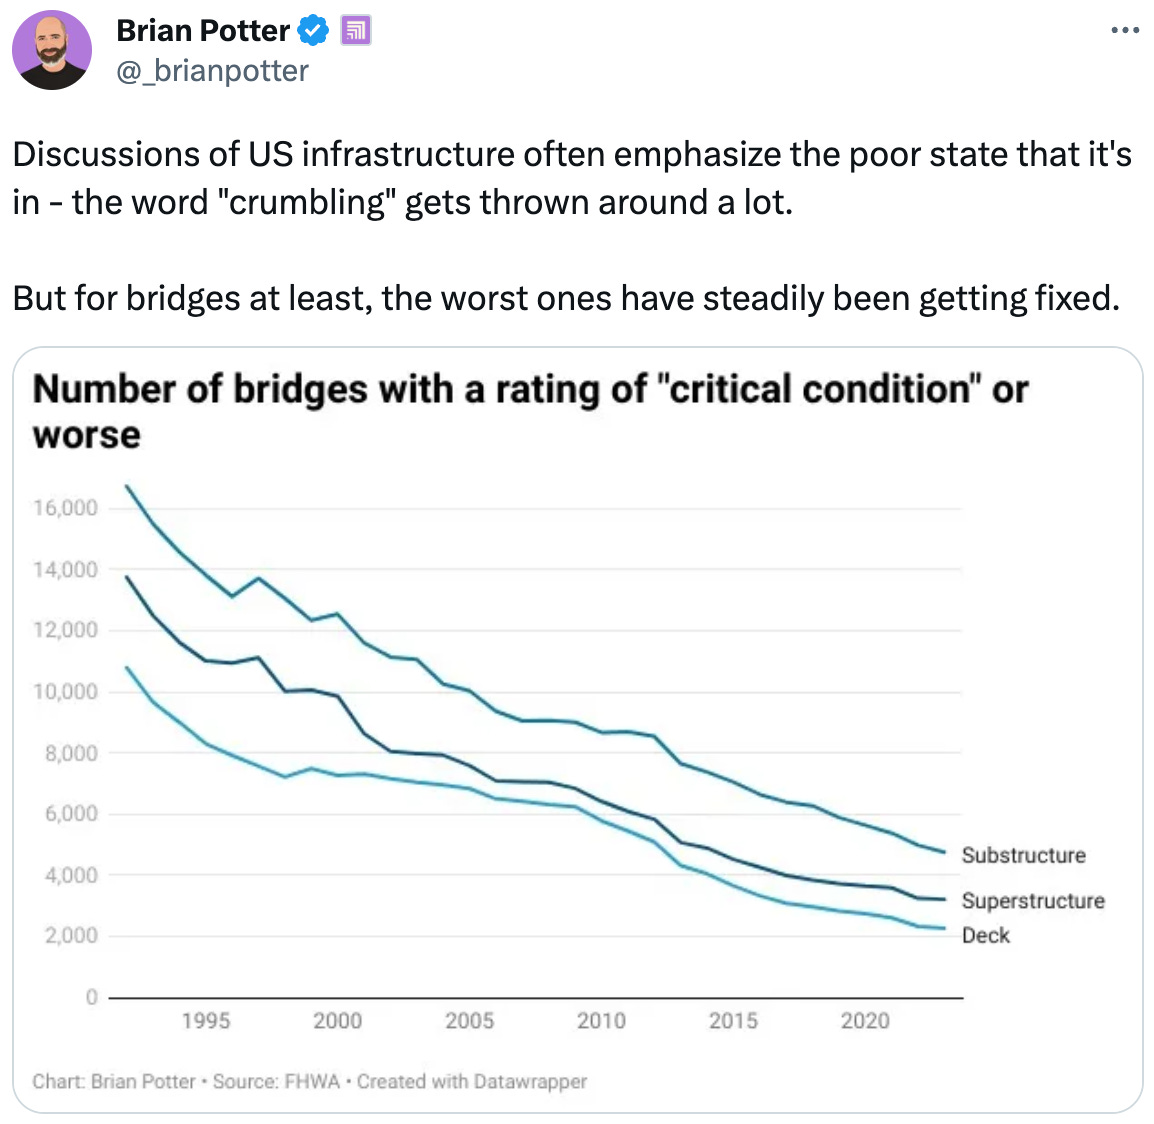  Brian Potter  @_brianpotter Discussions of US infrastructure often emphasize the poor state that it's in - the word "crumbling" gets thrown around a lot.  But for bridges at least, the worst ones have steadily been getting fixed.